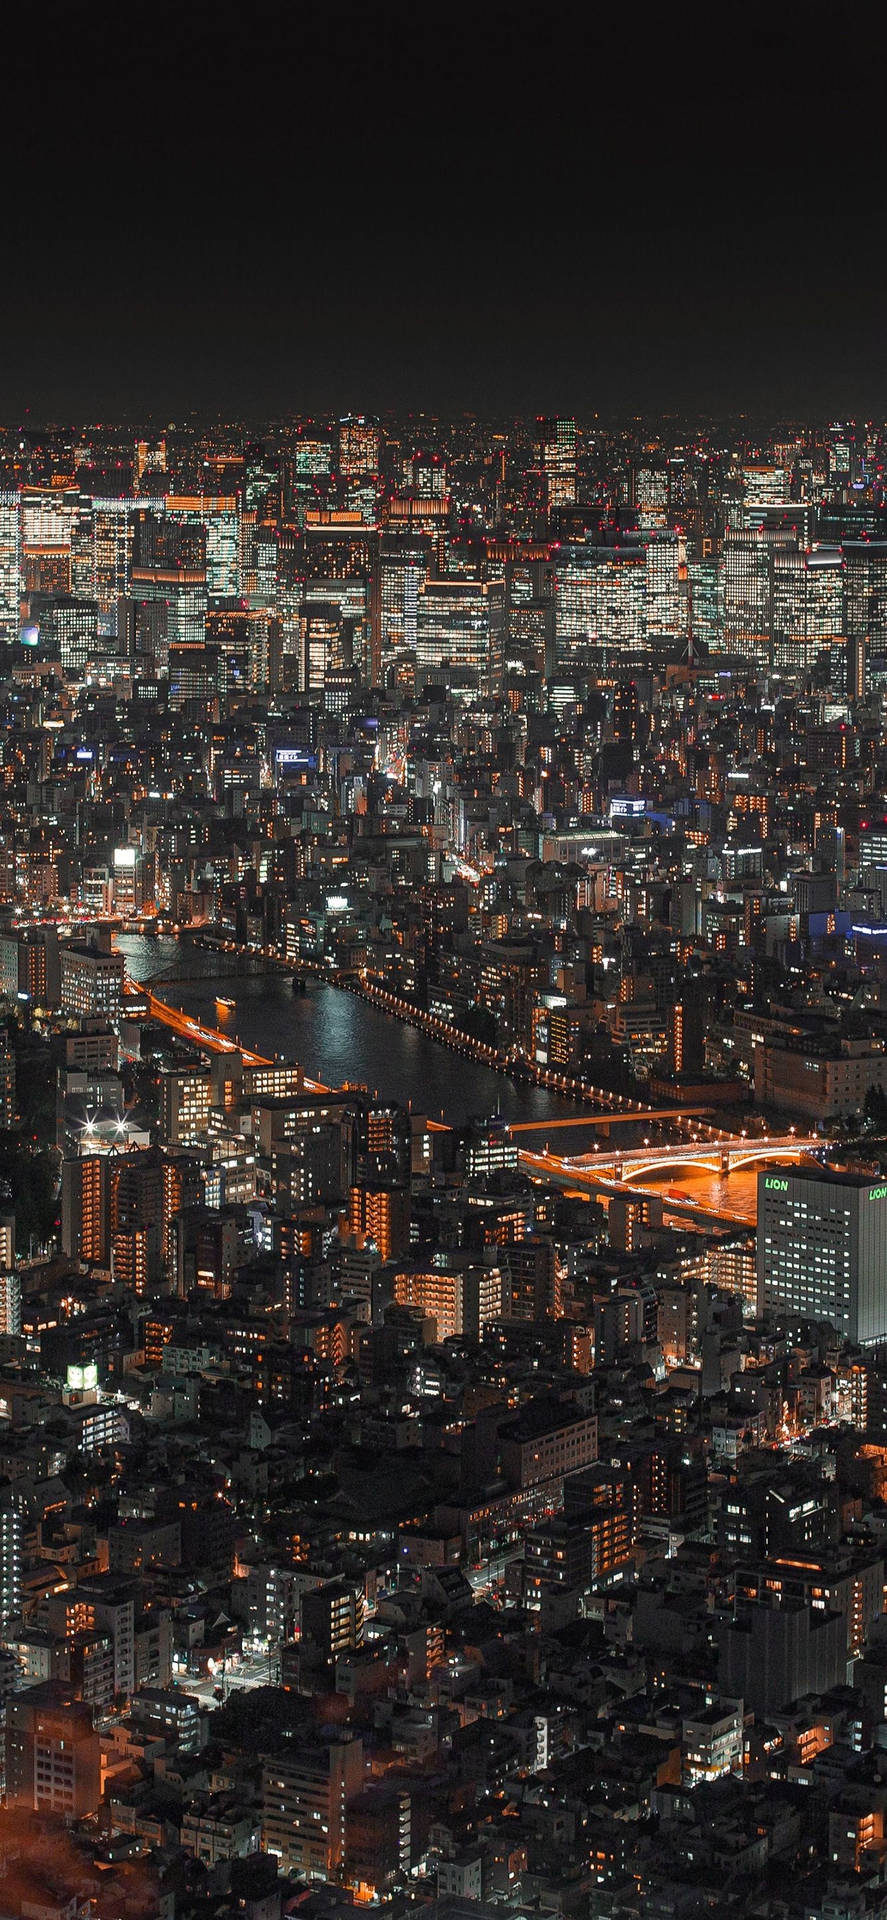 Crowded Night City Aesthetic Wallpaper